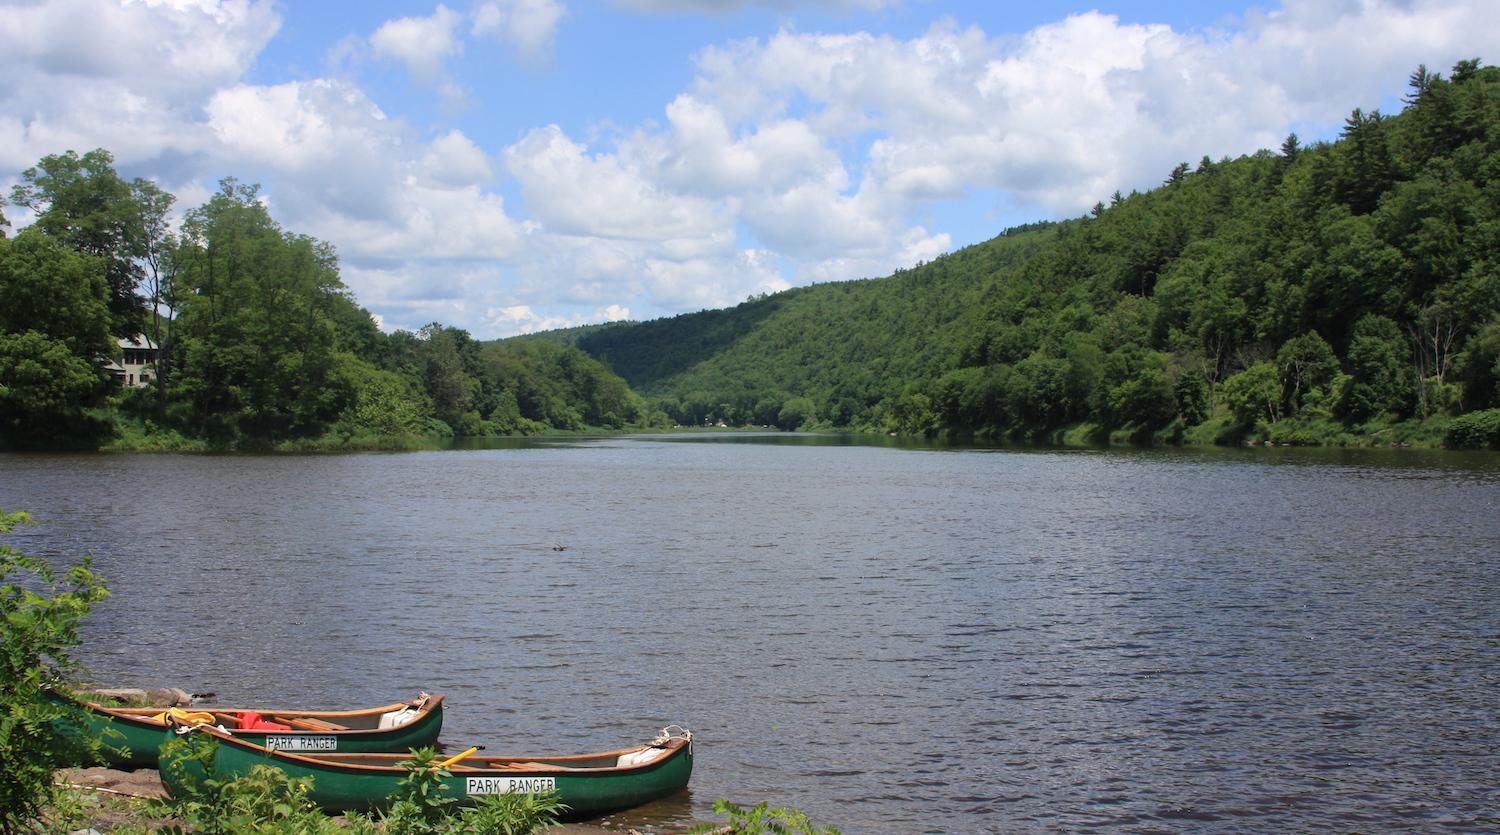 View of two canoes on the Upper Delaware River